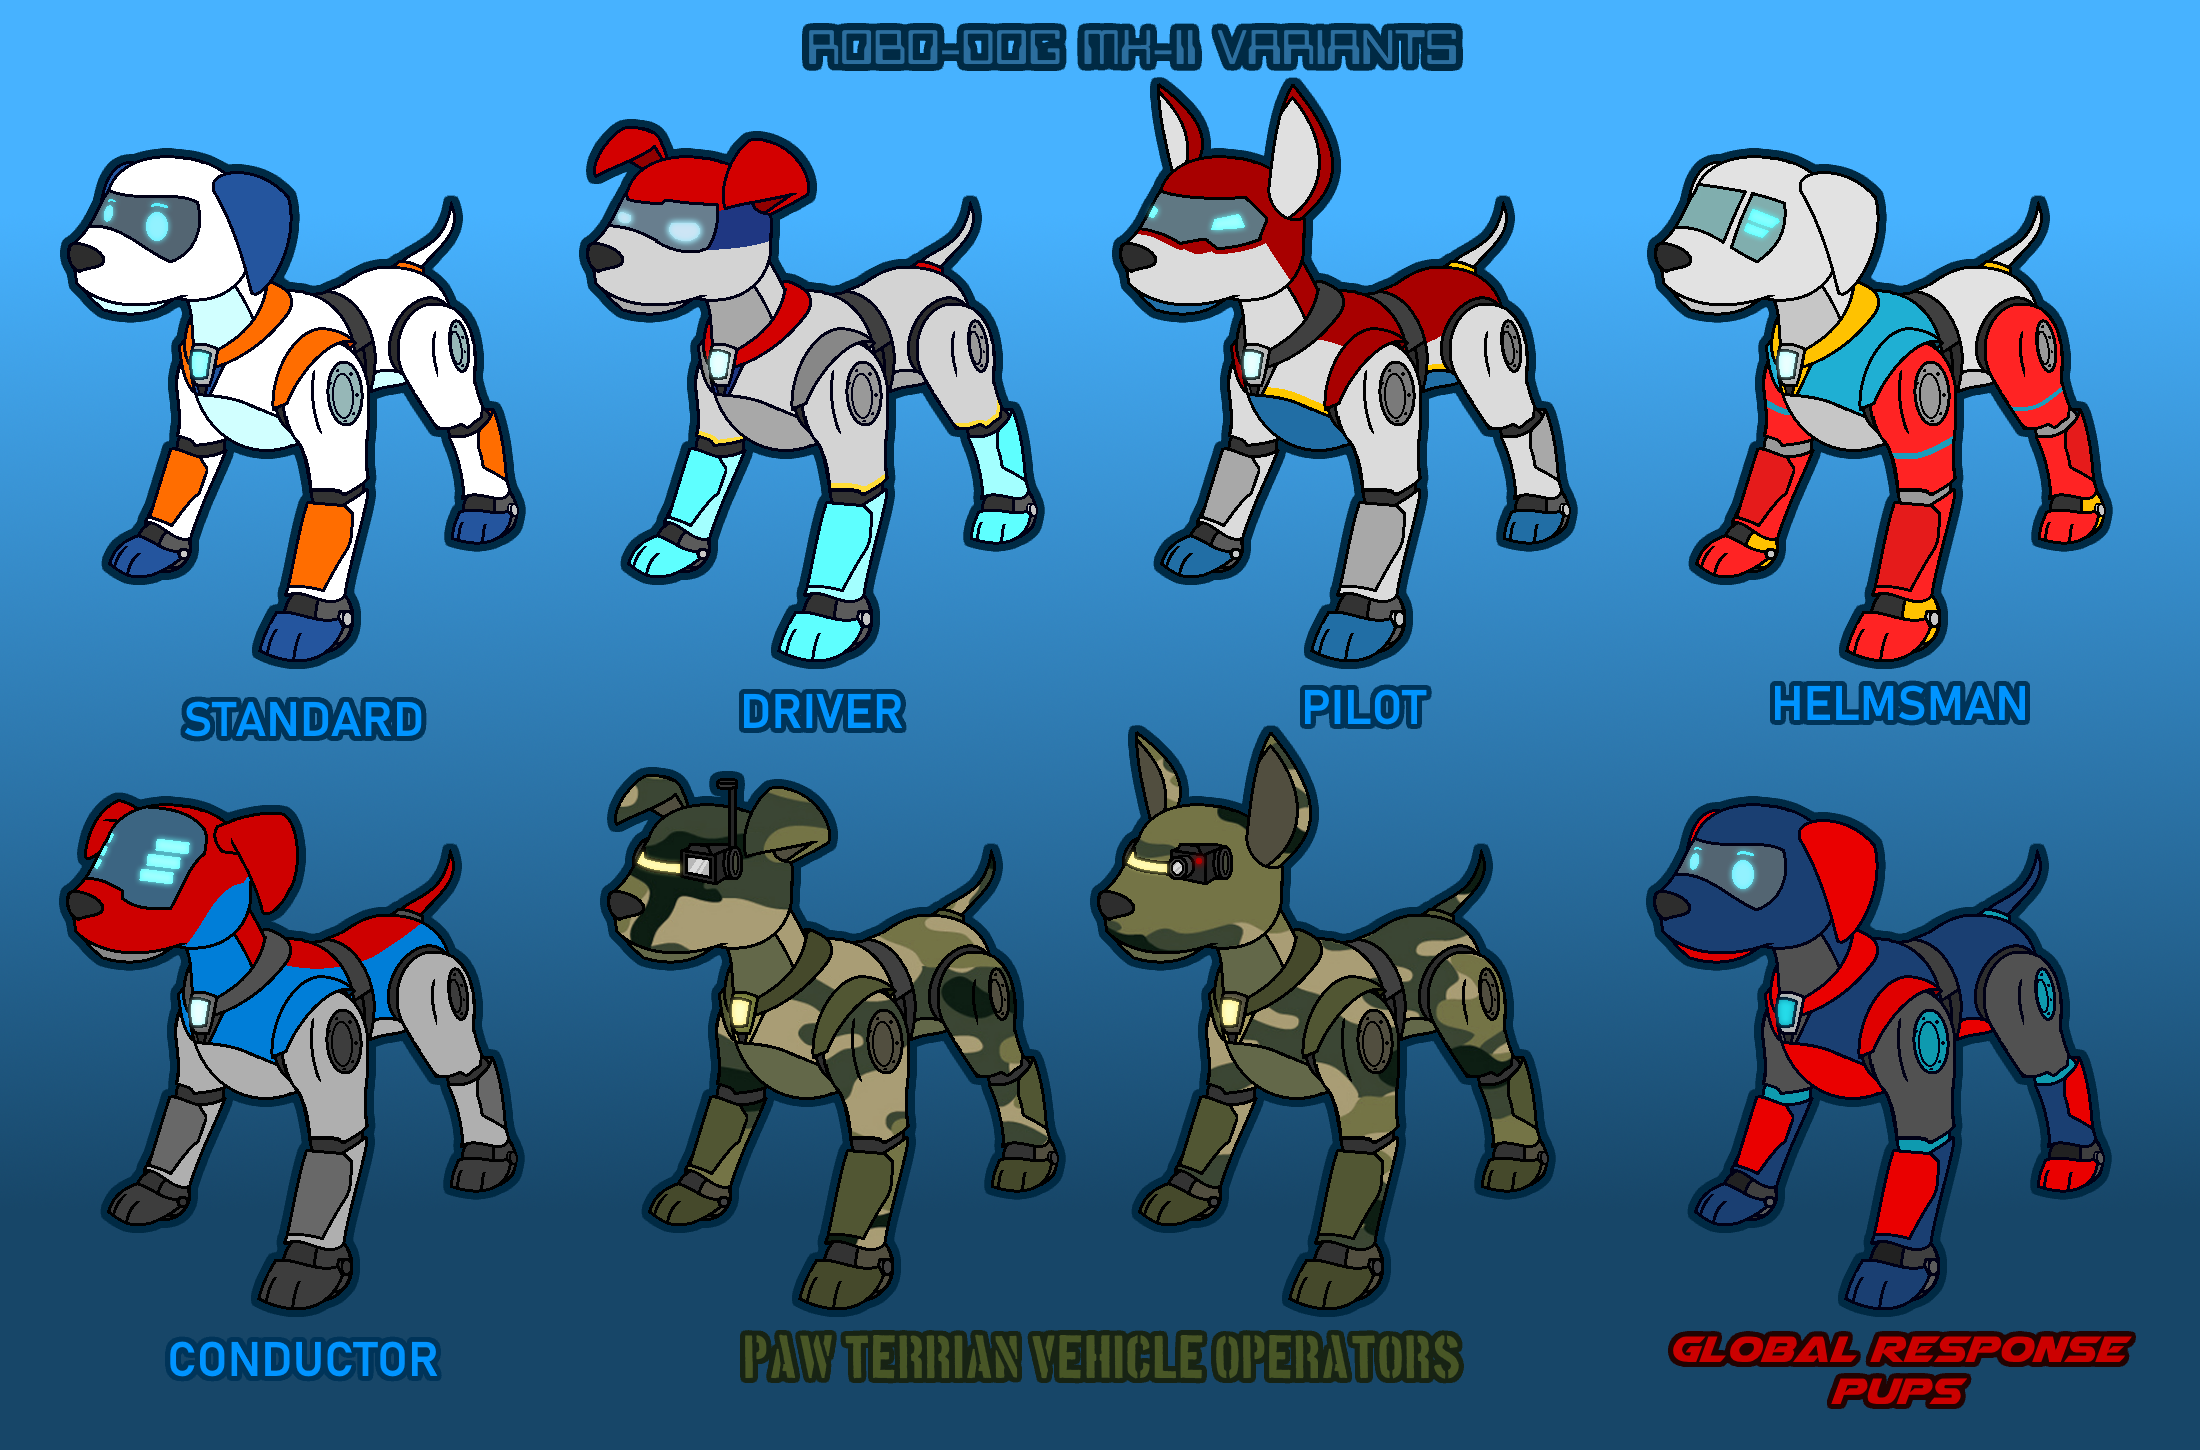 PAW Patrol: Robo-Dog (and more!) by nobodyherewhatsoever on DeviantArt